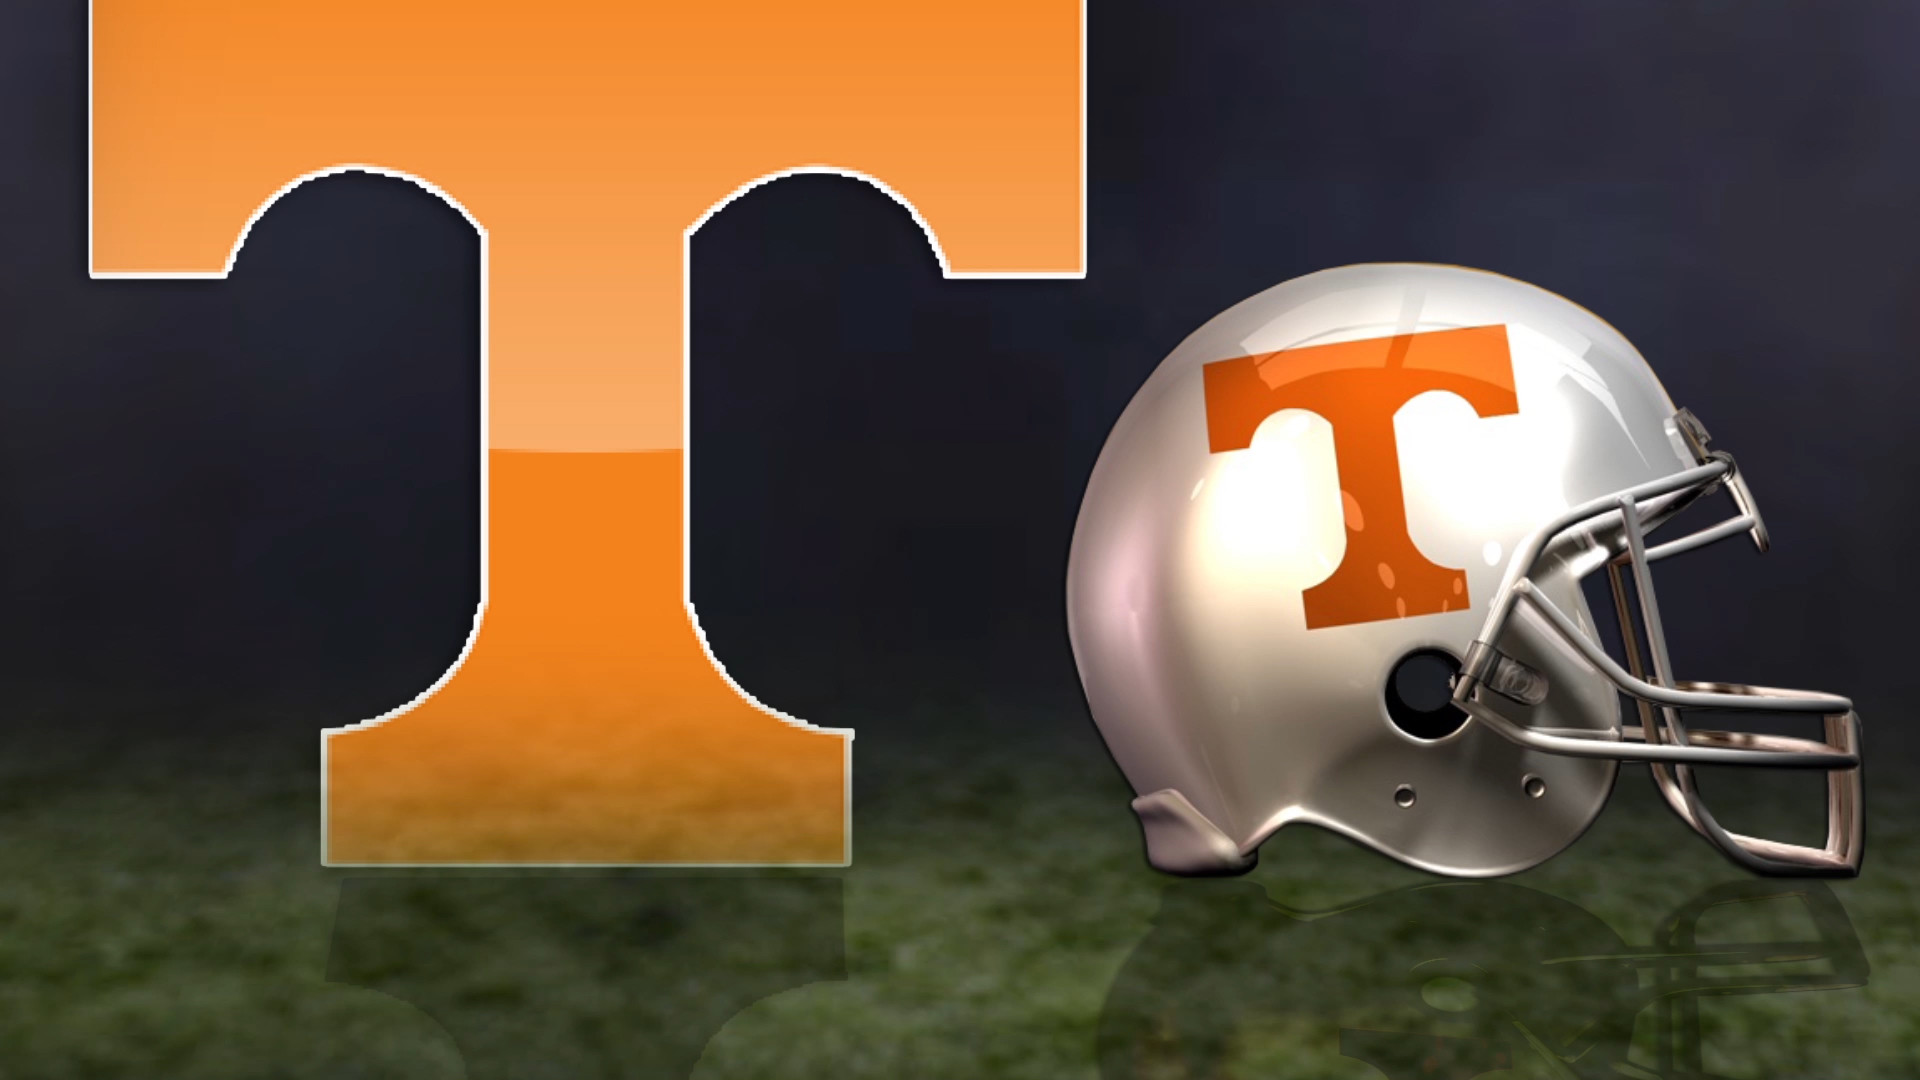 Tennessee Vols Background Wallpaper.